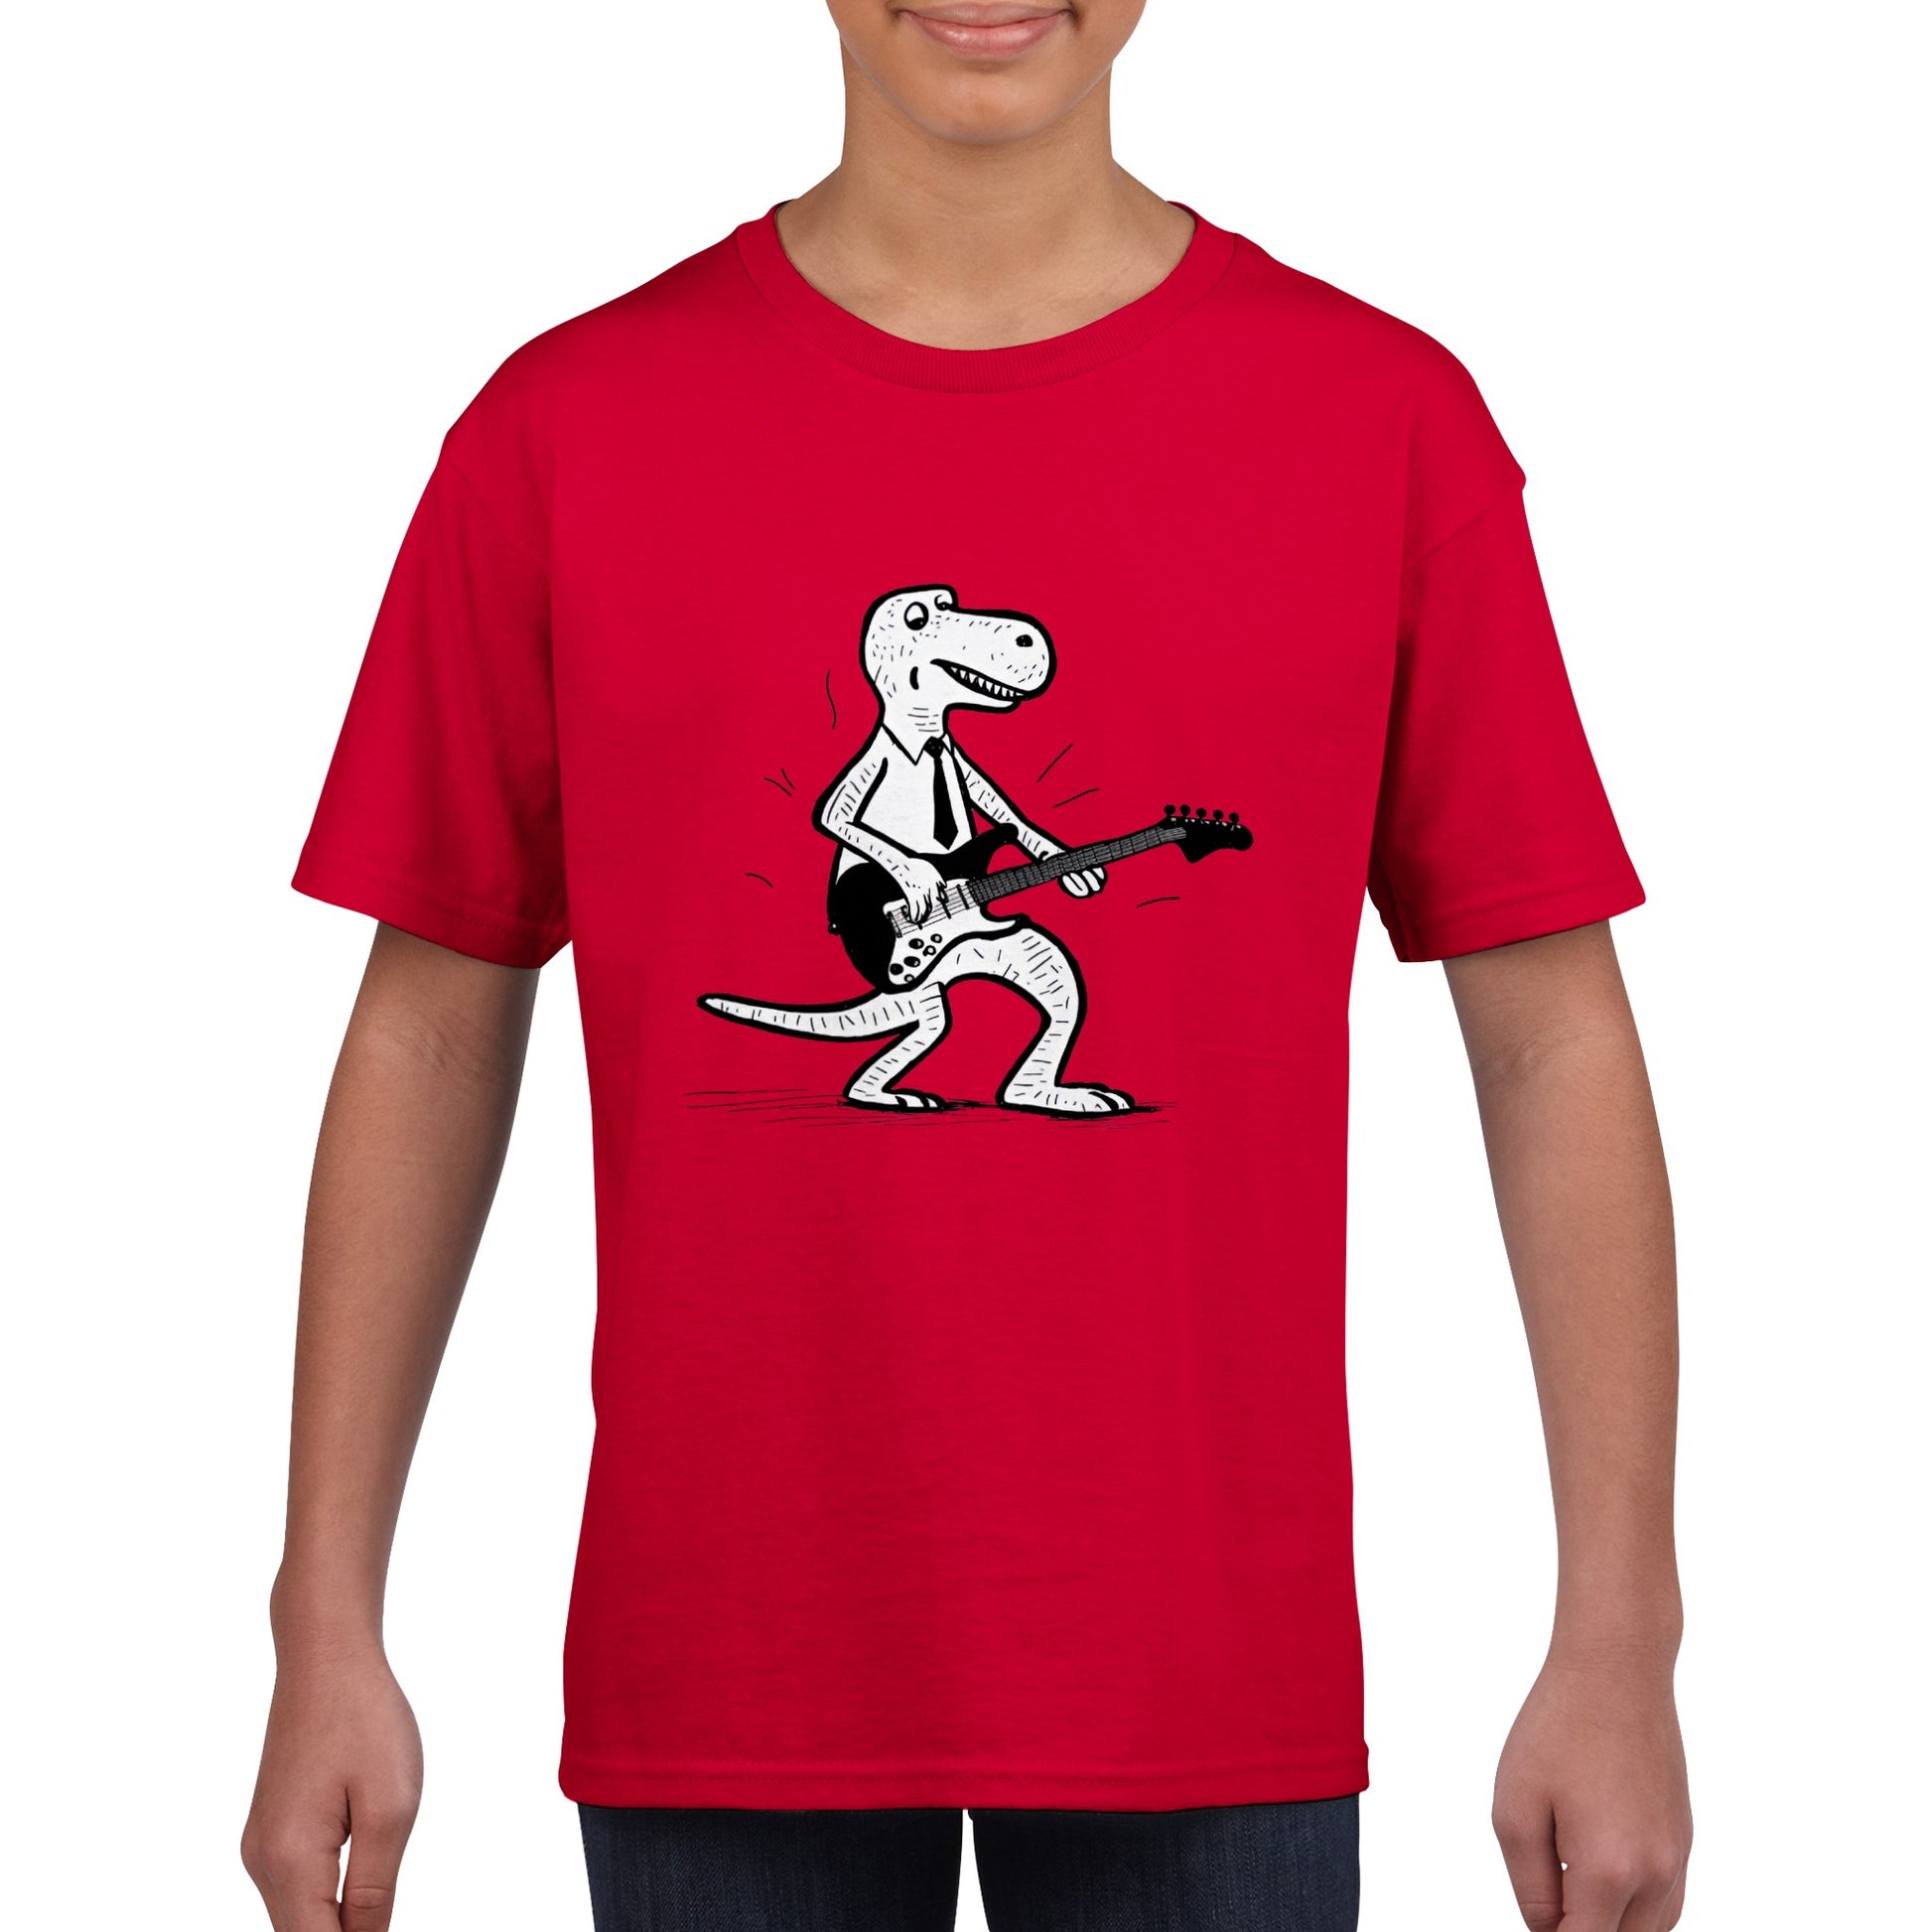 boy wearing a red t-shirt with a t-rex dinosaur wearing a tie playing the guitar print